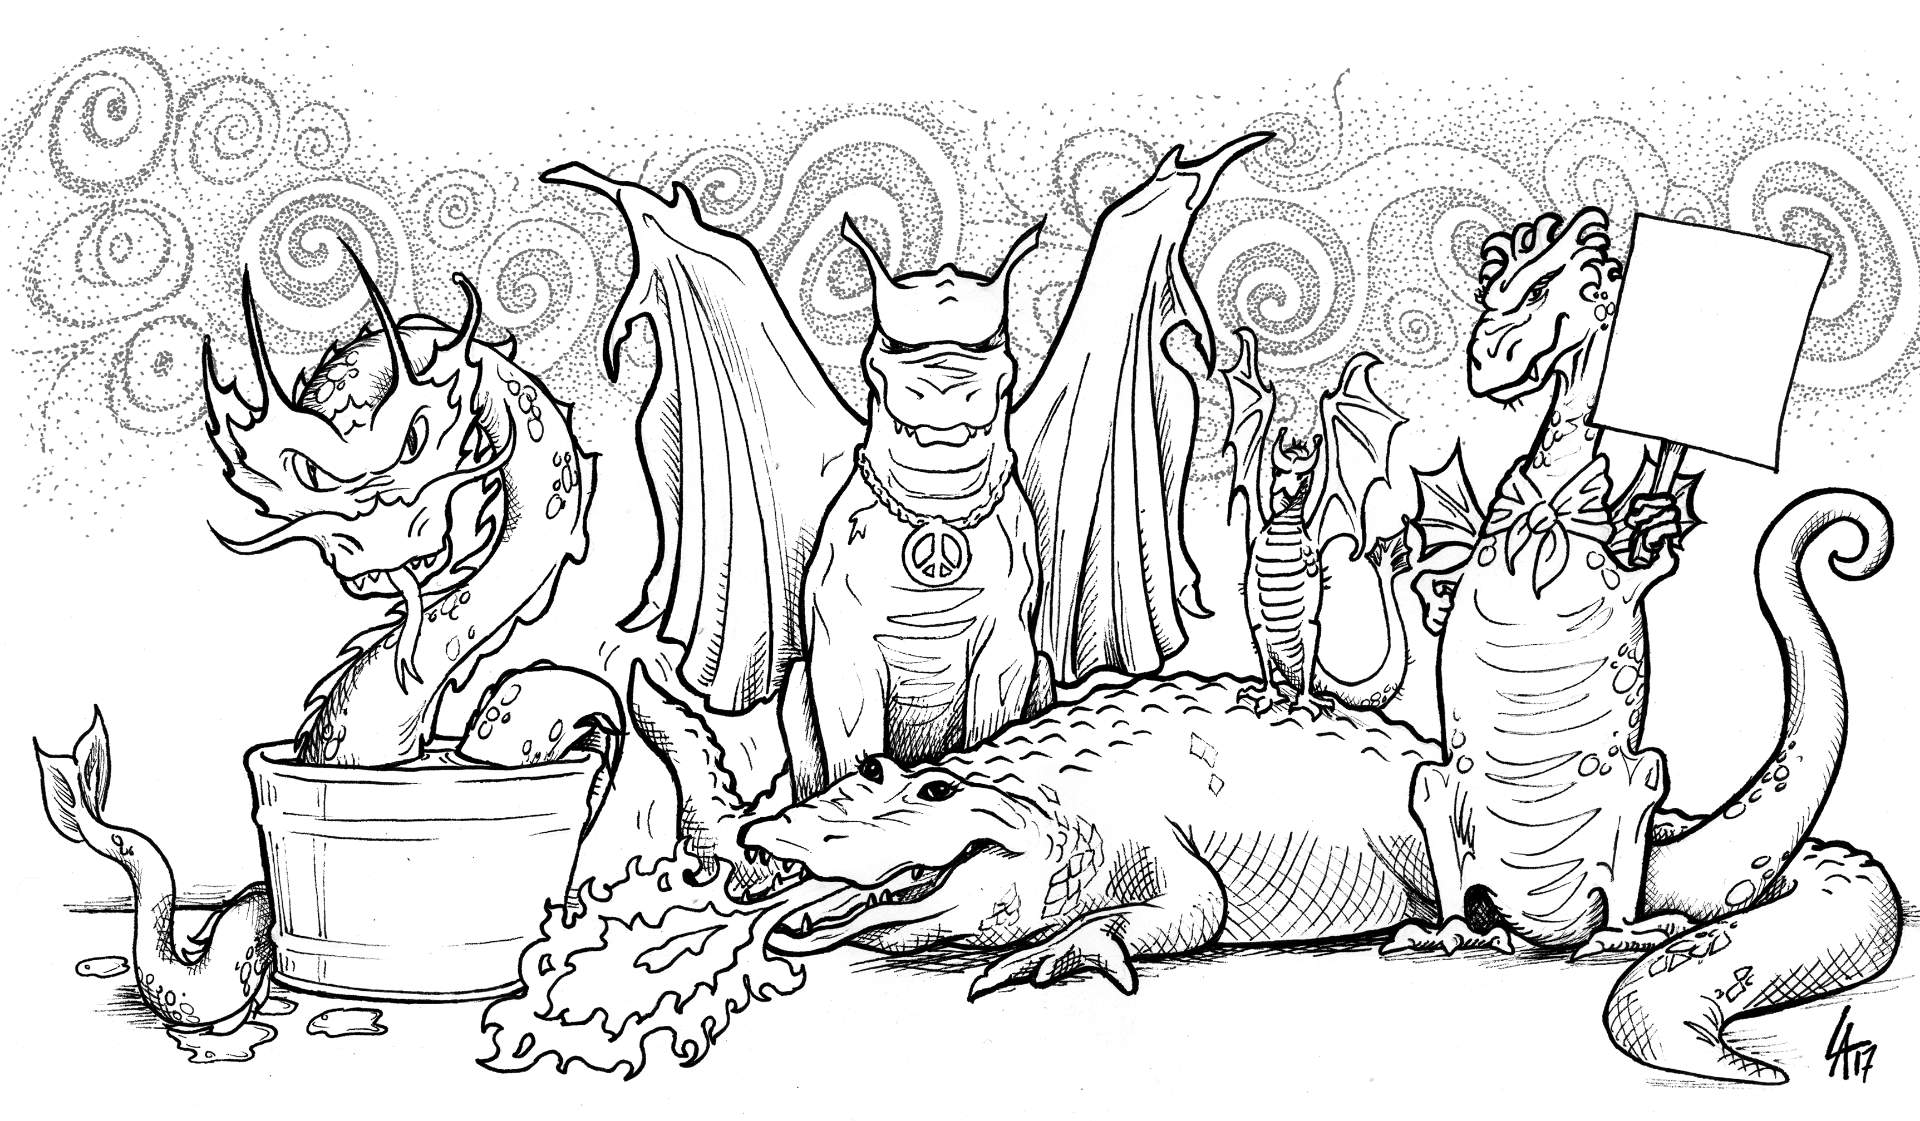 Five dragons illustrated for the cover of my colouring book, filled with other cool dragons.